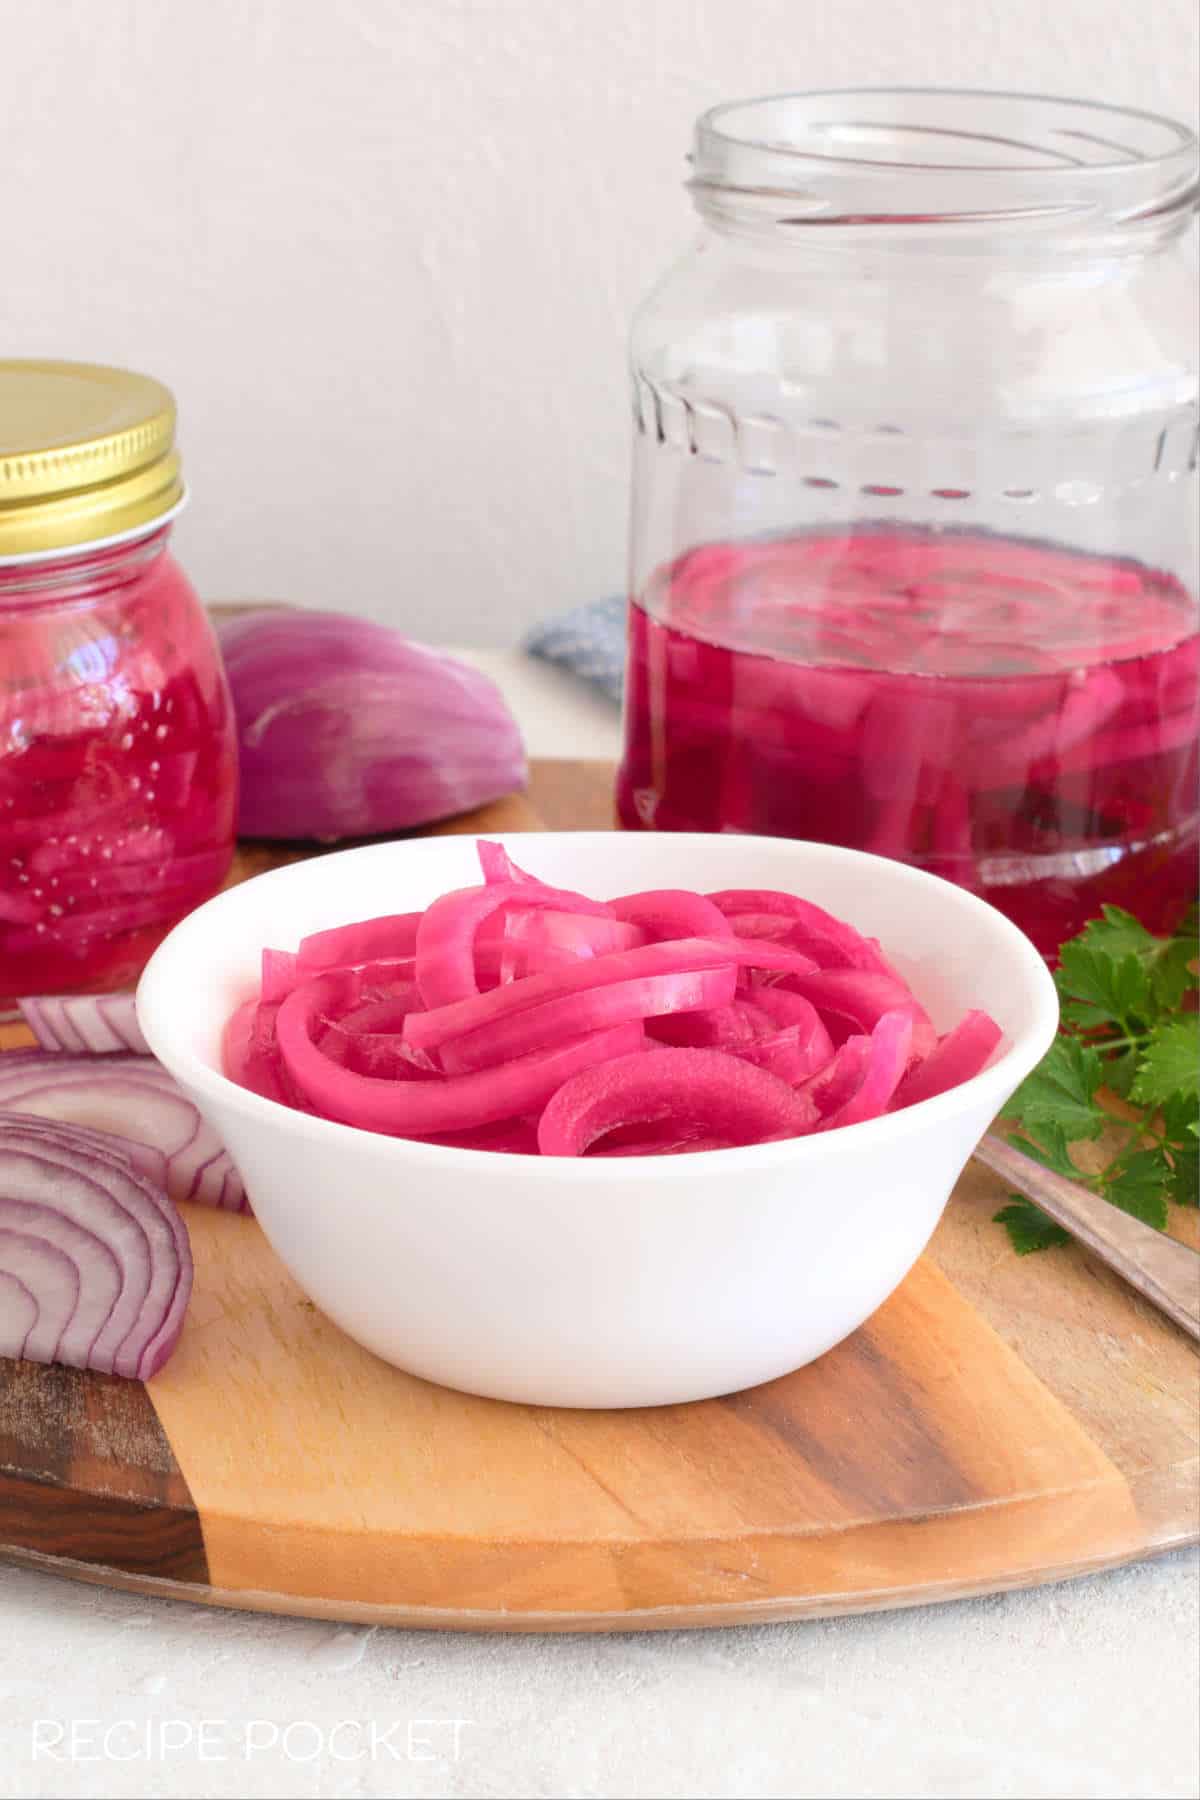 Two bottles of pickled pink onions.